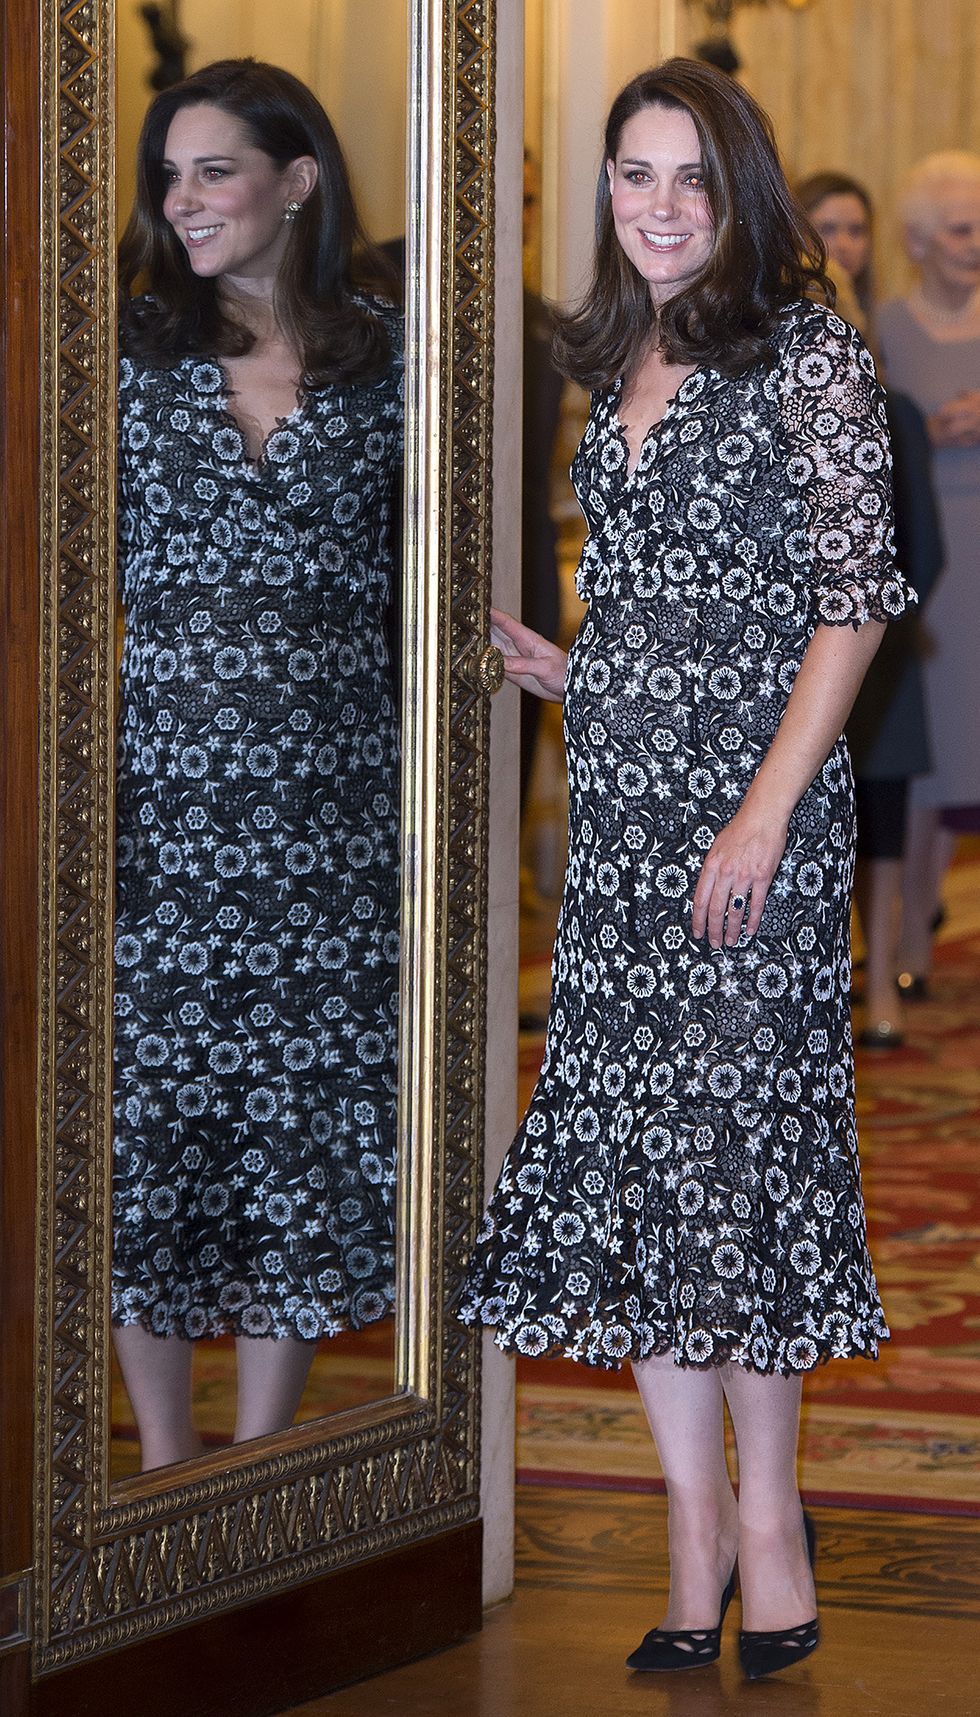 The Duchess wore Erdem to the Commonwealth Fashion Exchange Reception in London